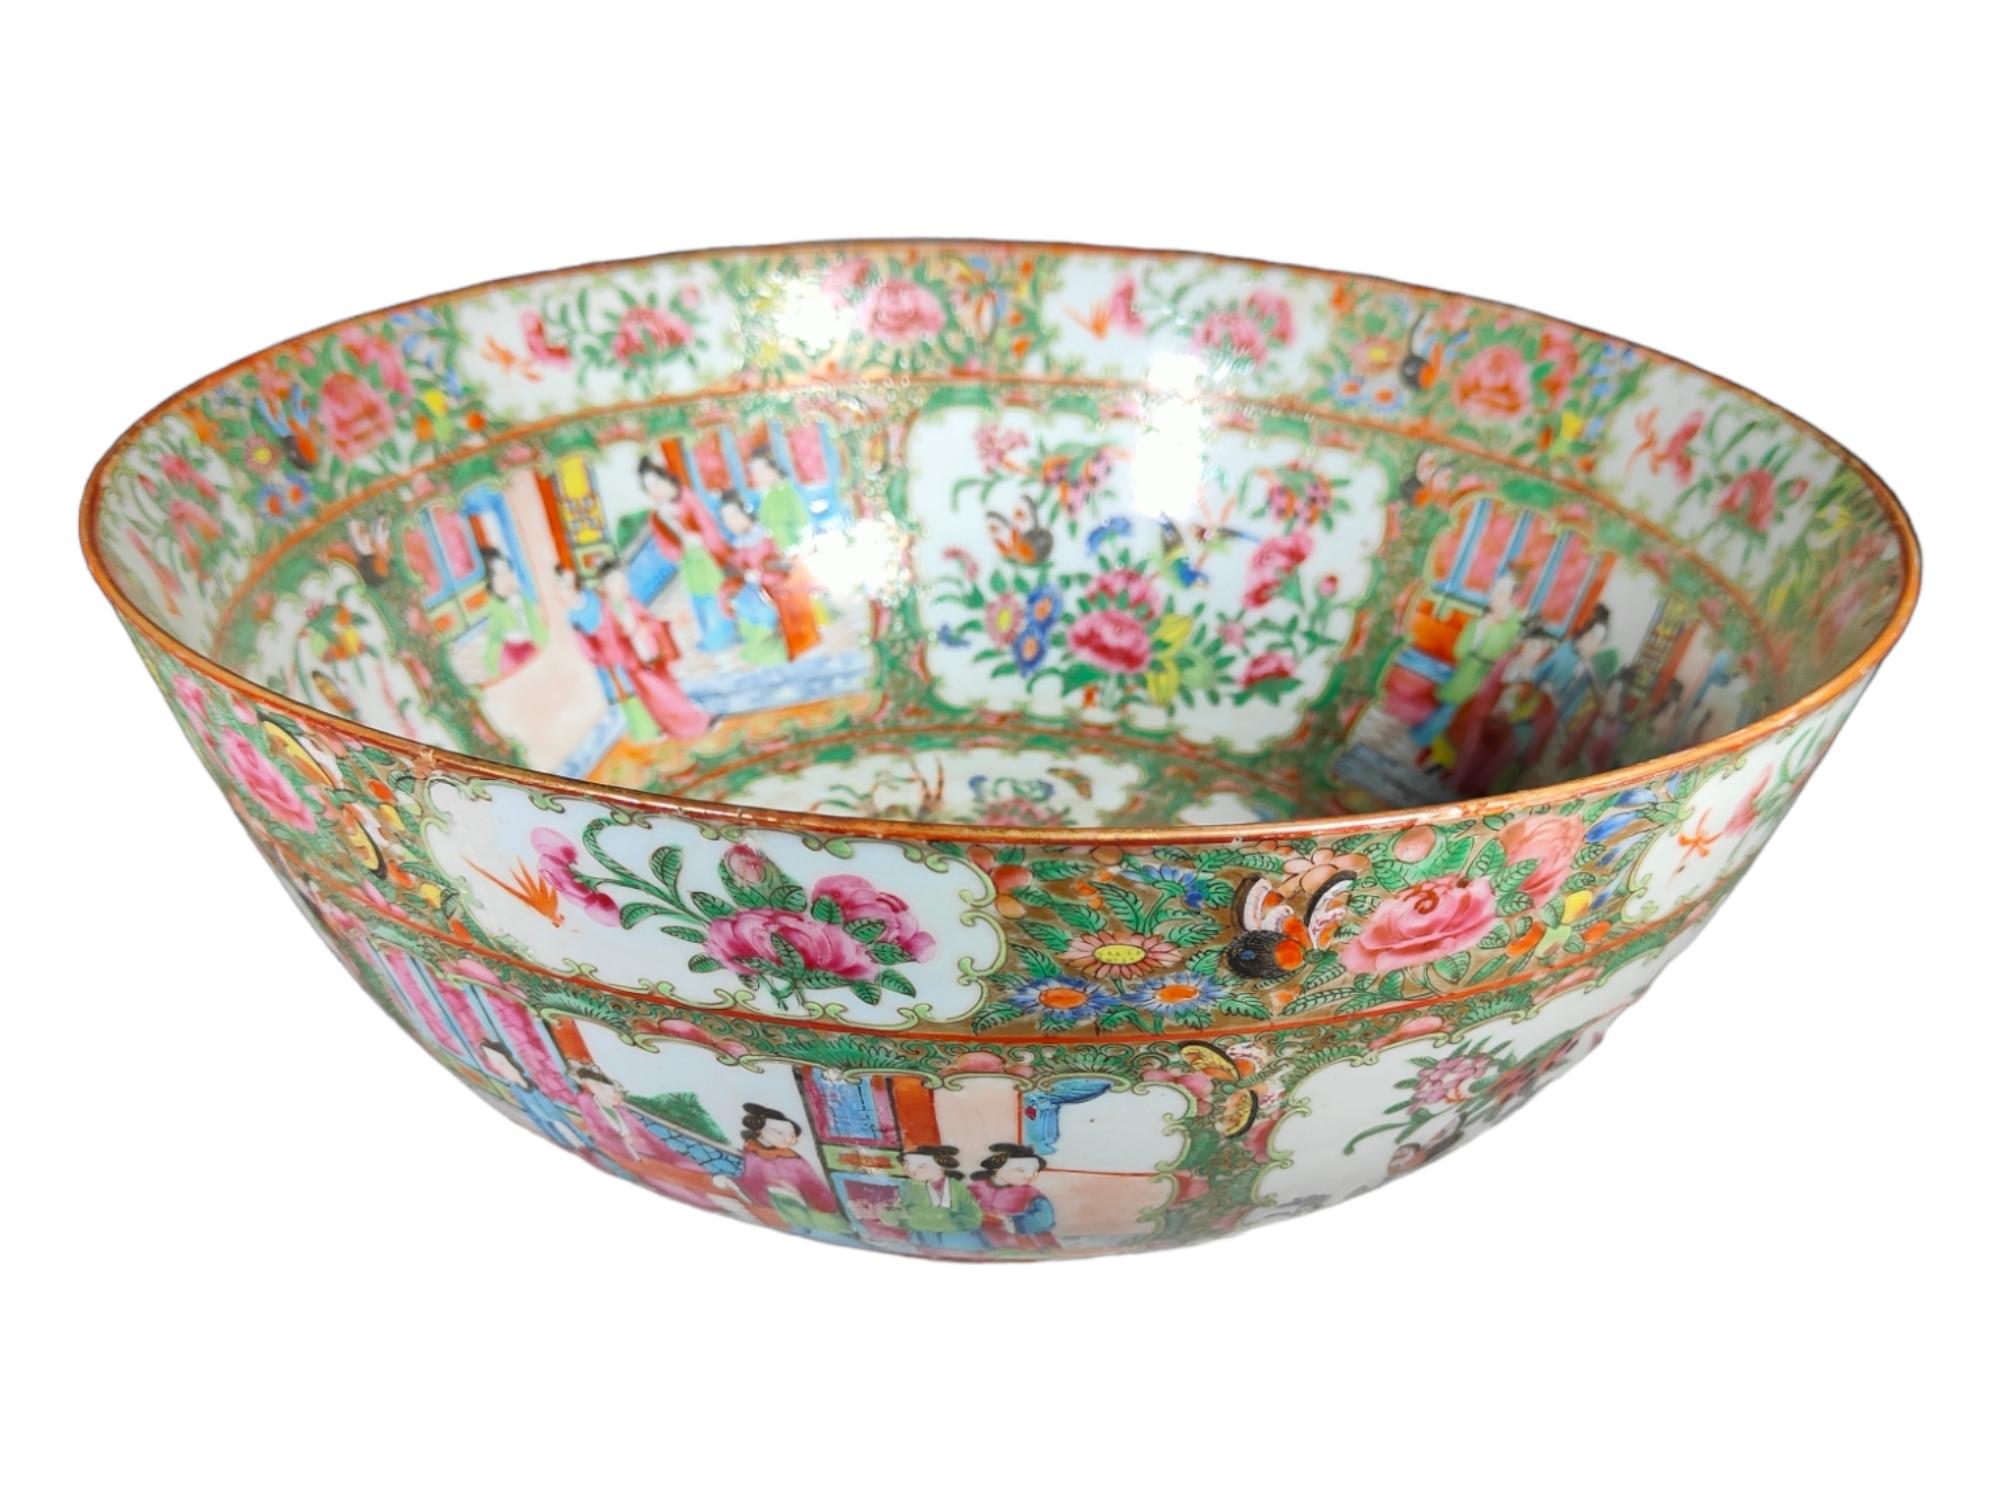 With Rose Medallion (Rose Family) decoration. The central cartridge of the basin represents a court scene. The inner and outer walls of the bowl have multiple cartouches which each alternate between scenes of people and scenes of flora/fauna. The